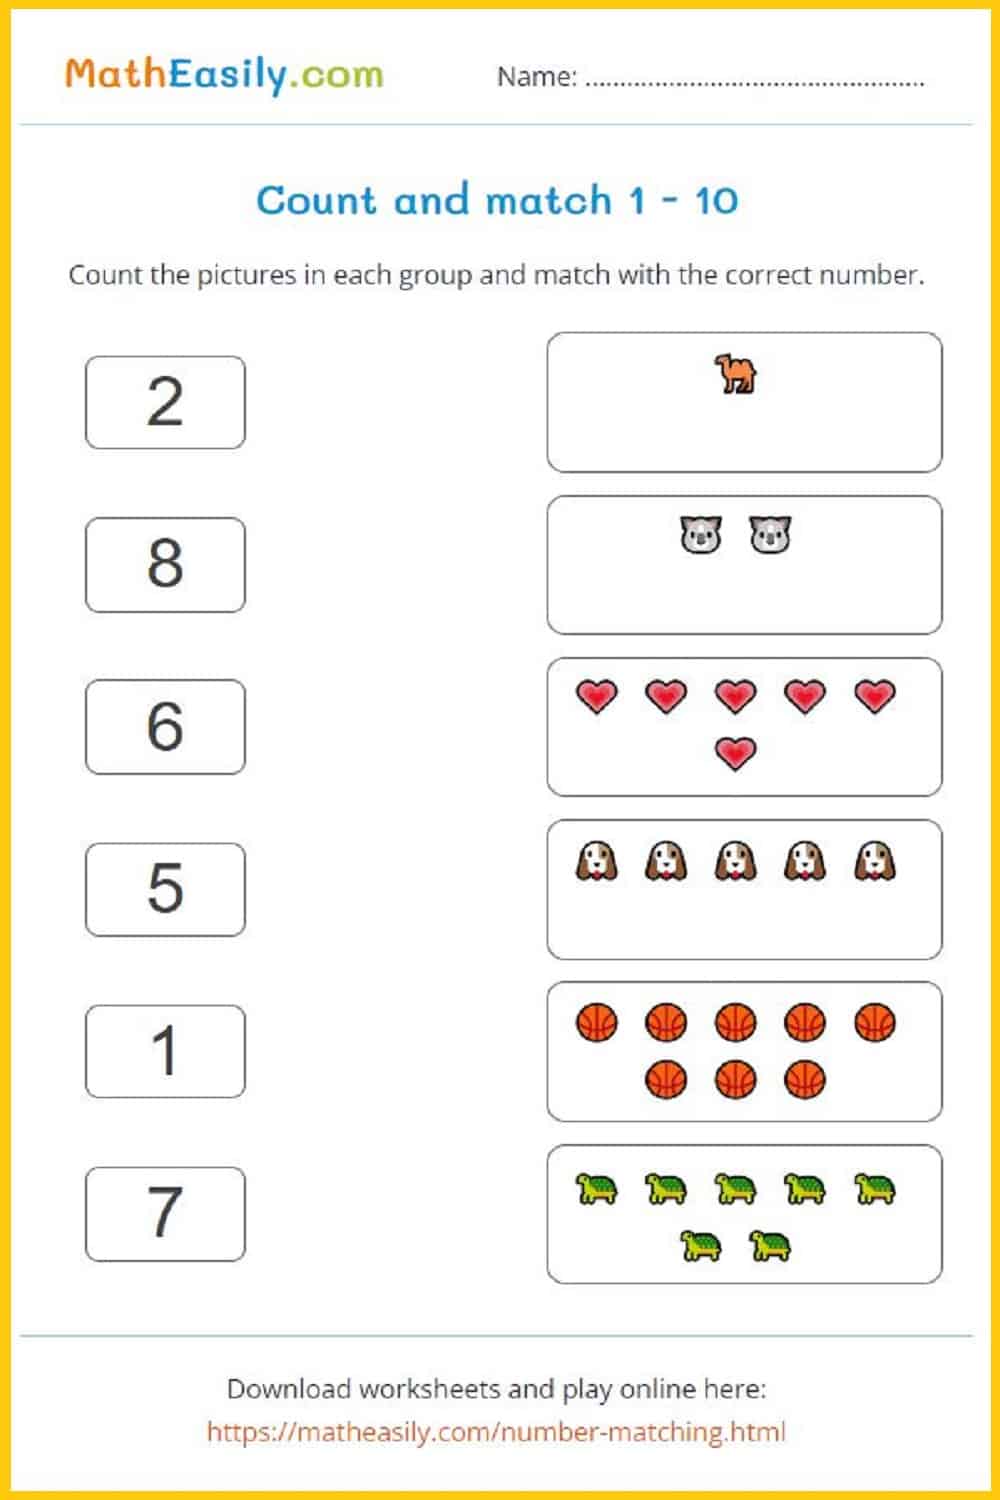 Math counting worksheets for kindergarten. counting 1 to 10 worksheets for kindergarten. count to 10. Number counting games preschoolers.